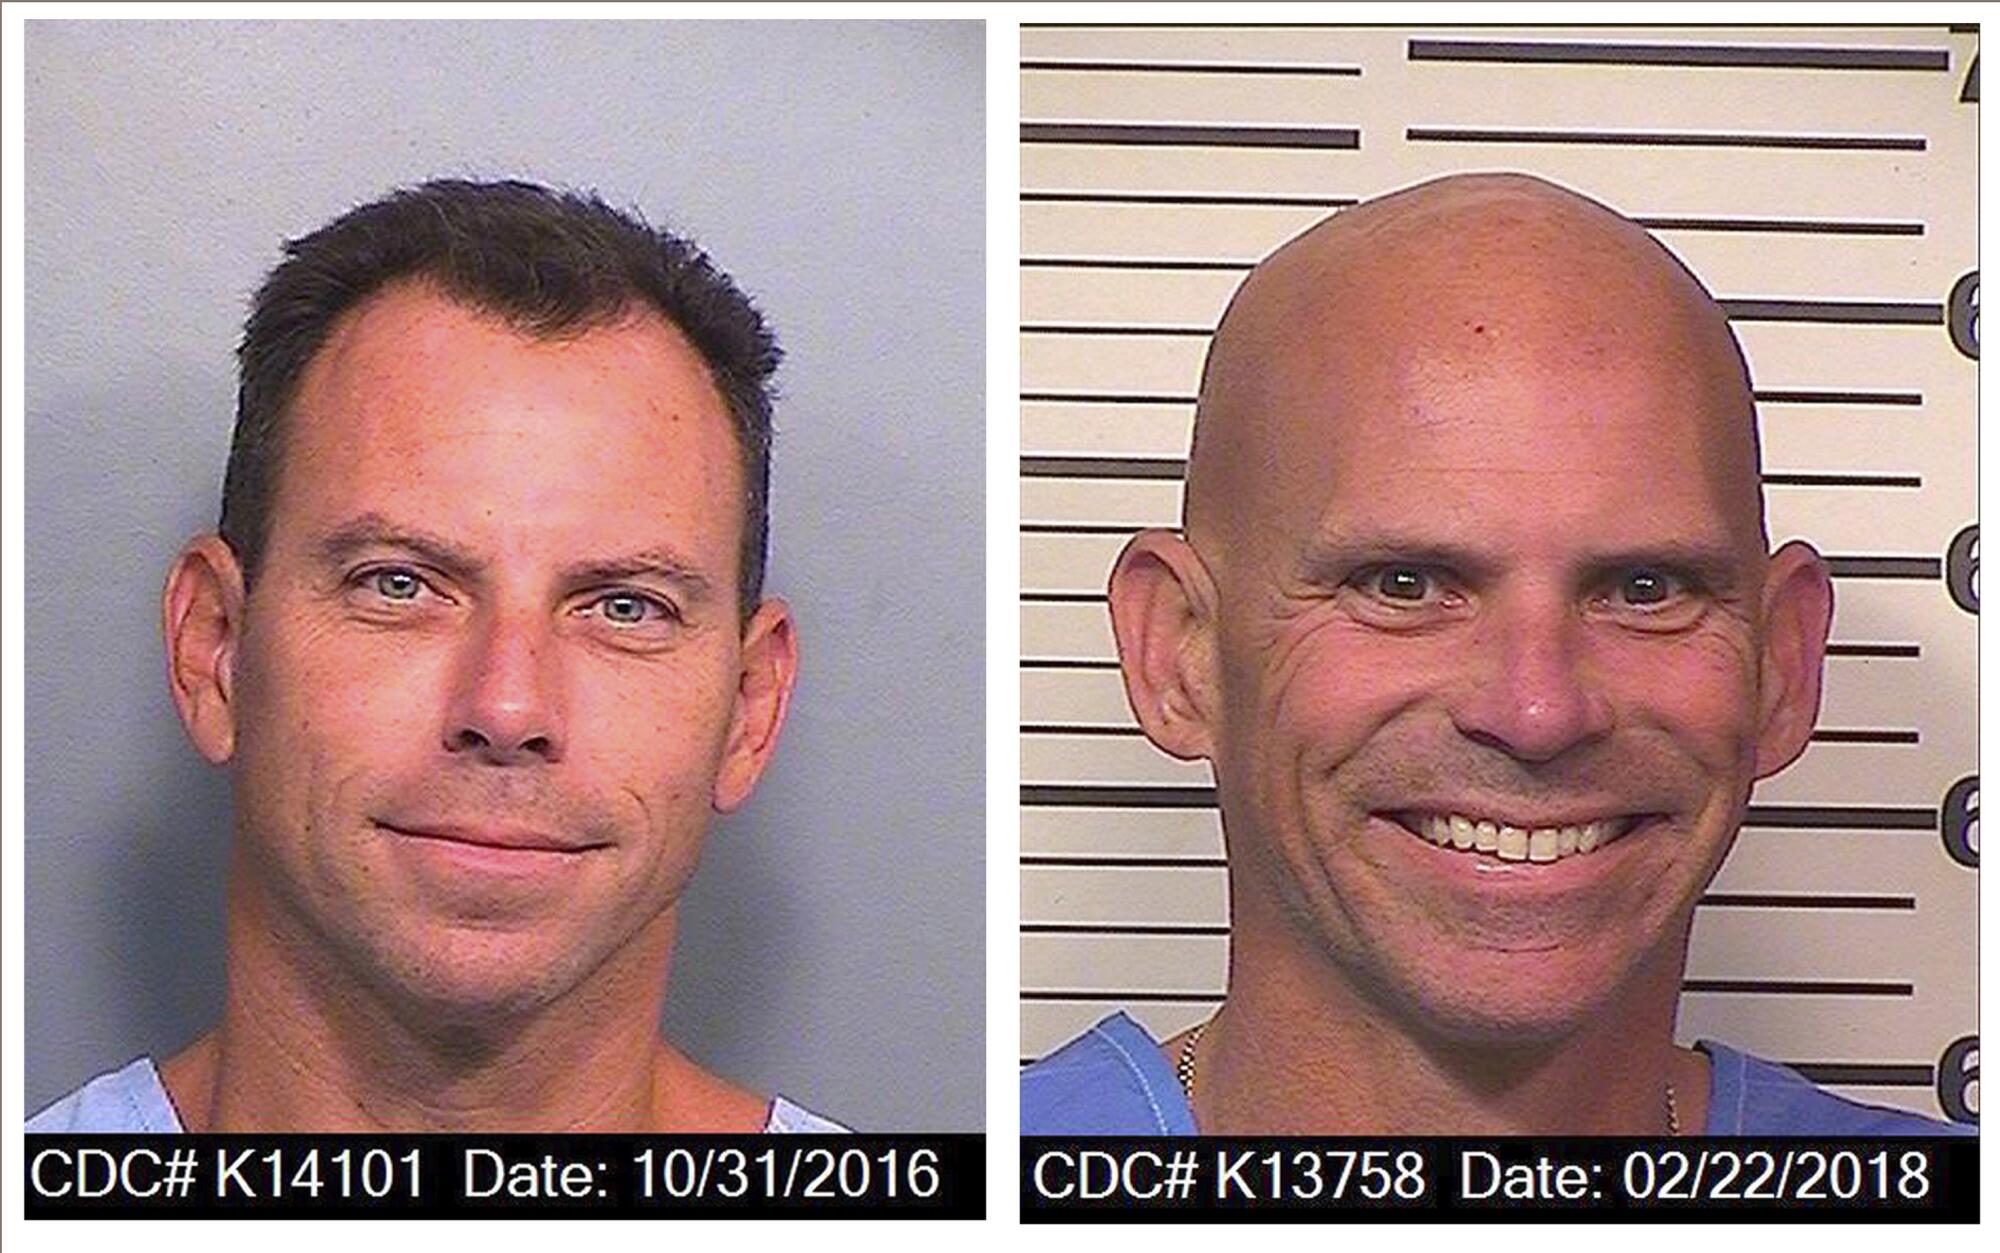 Booking photos of Erik and Lyle Menendez, one with short brown hair and the other bald.